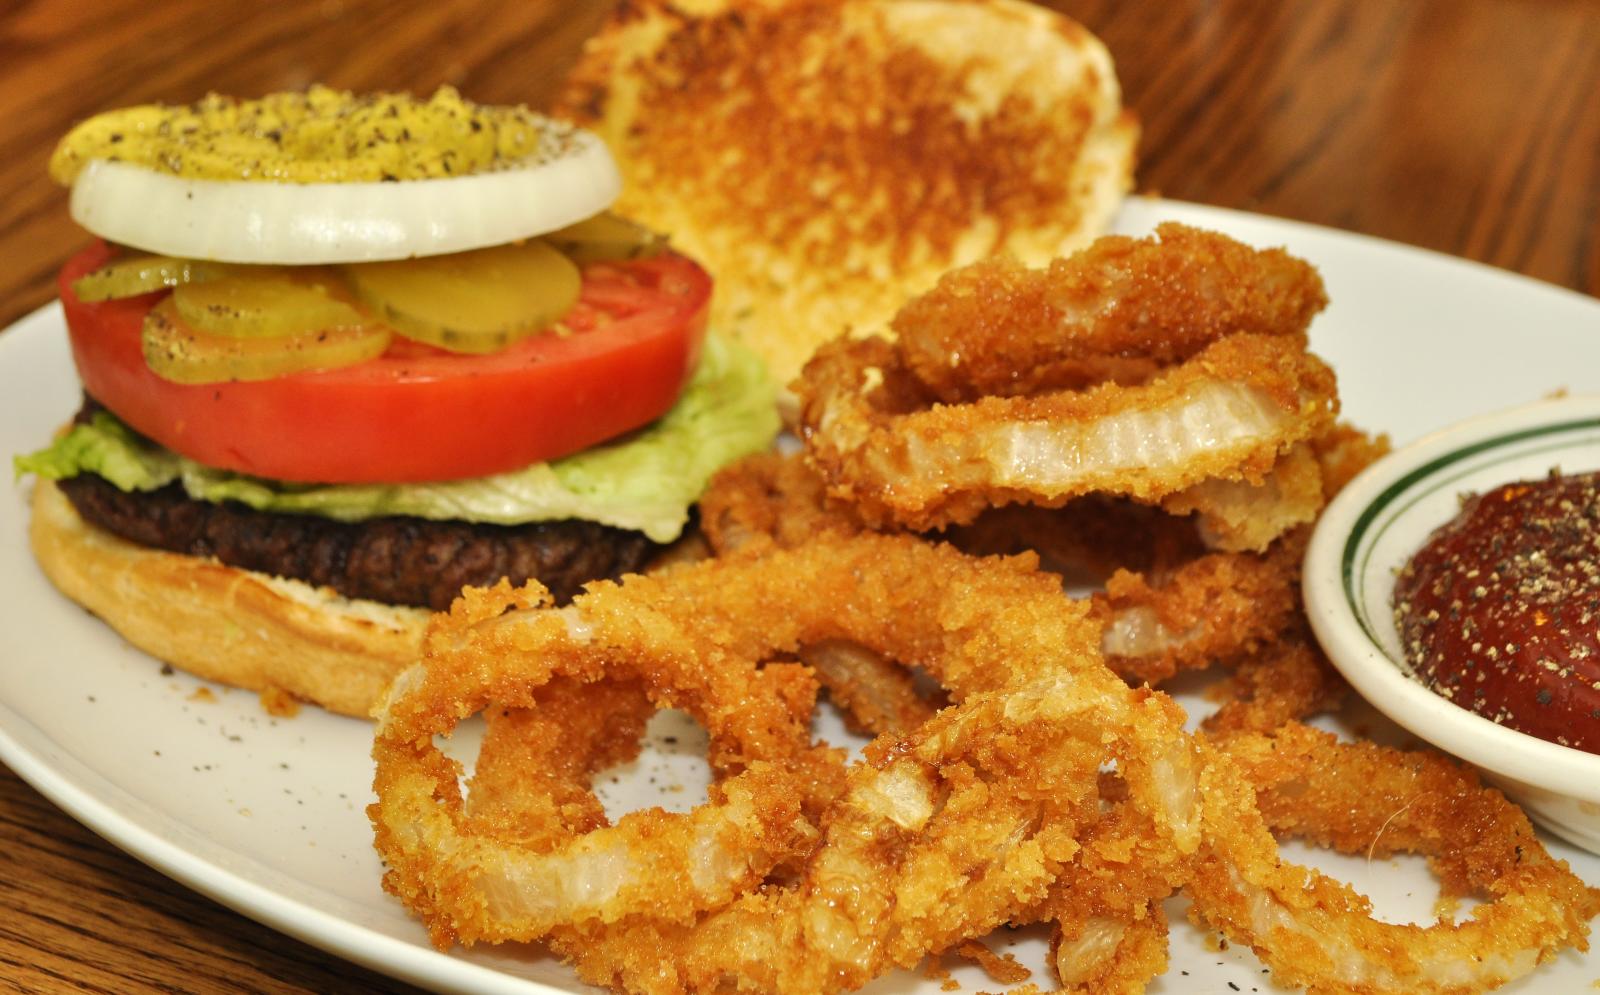 a plate has onion rings, a burger, and onion rings on it